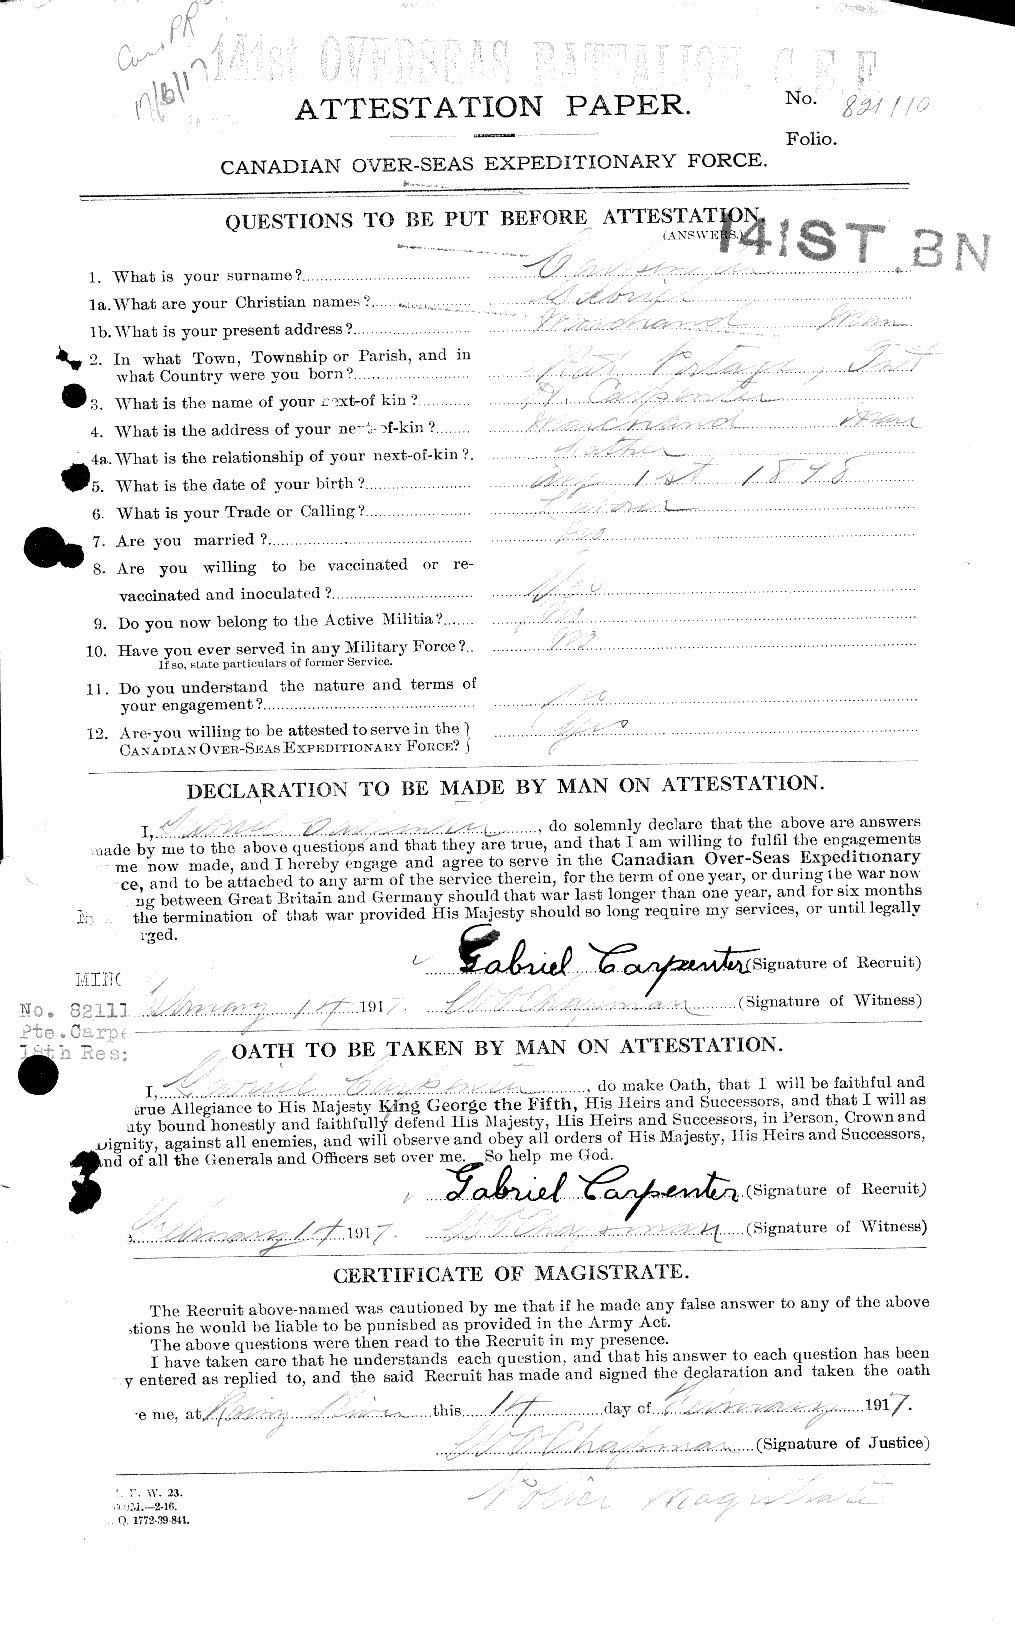 Personnel Records of the First World War - CEF 005258a